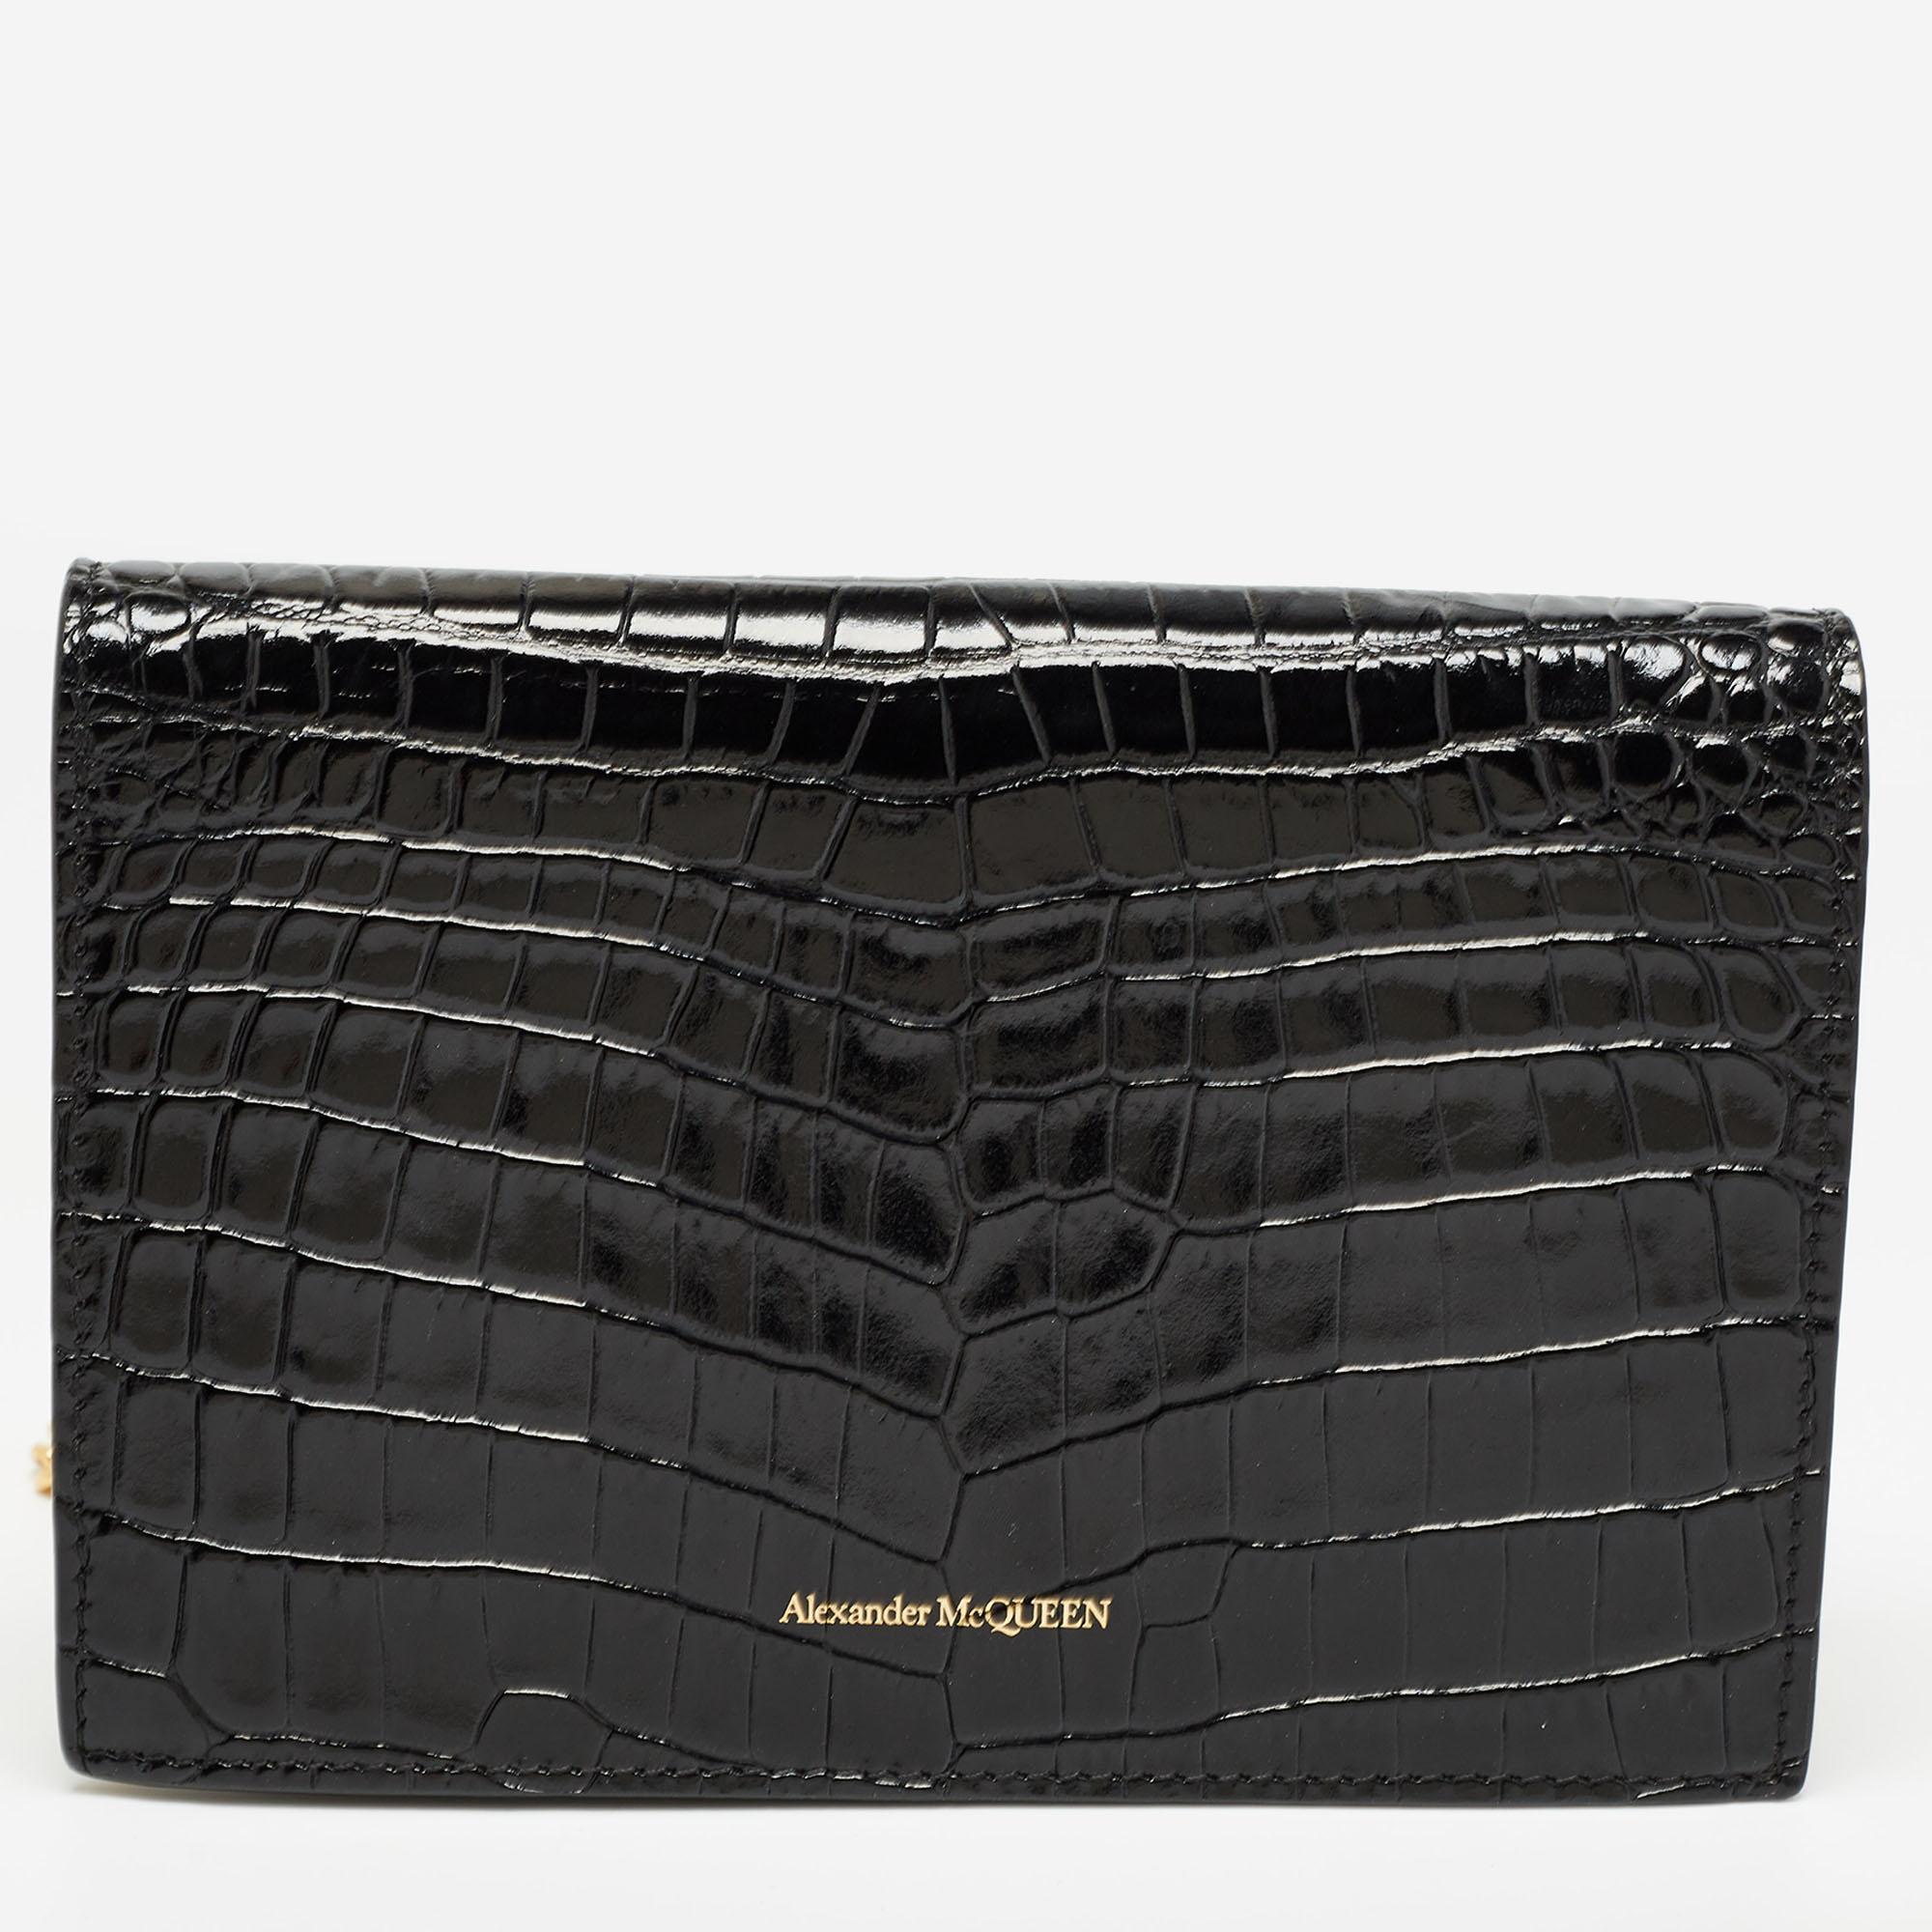 Alexander McQueen Black Croc Embossed Leather Skull Chain Clutch For Sale 2